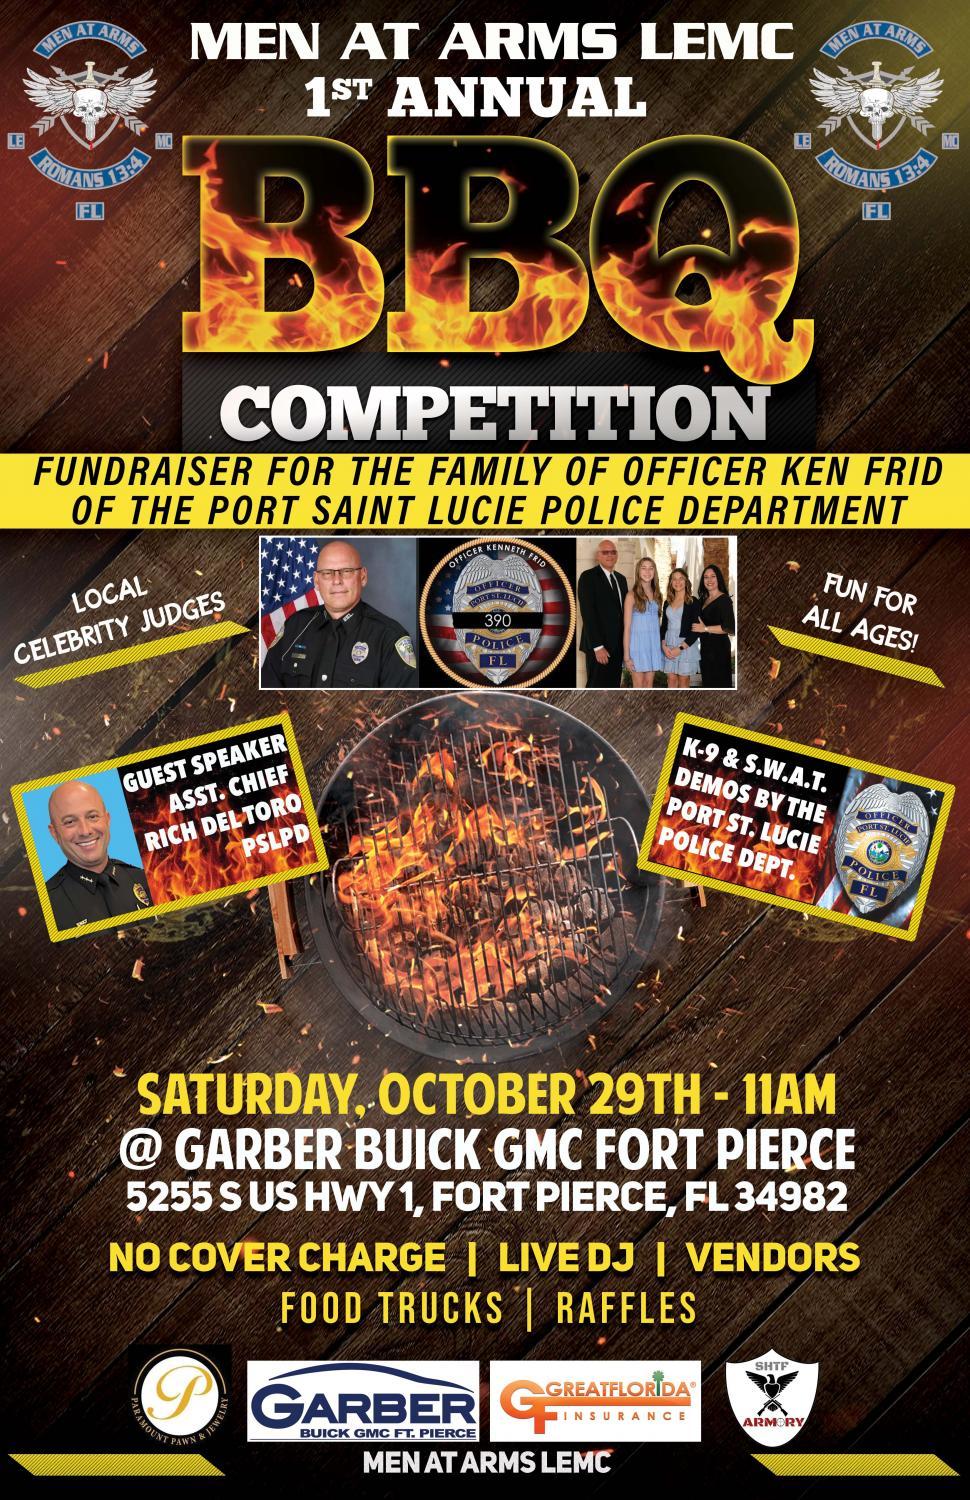 Men At Arms Law Enforcement Motorcycle Club 1st Annual BBQ Competition
Sat Oct 29, 11:00 AM - Sat Oct 29, 6:00 PM
in 9 days